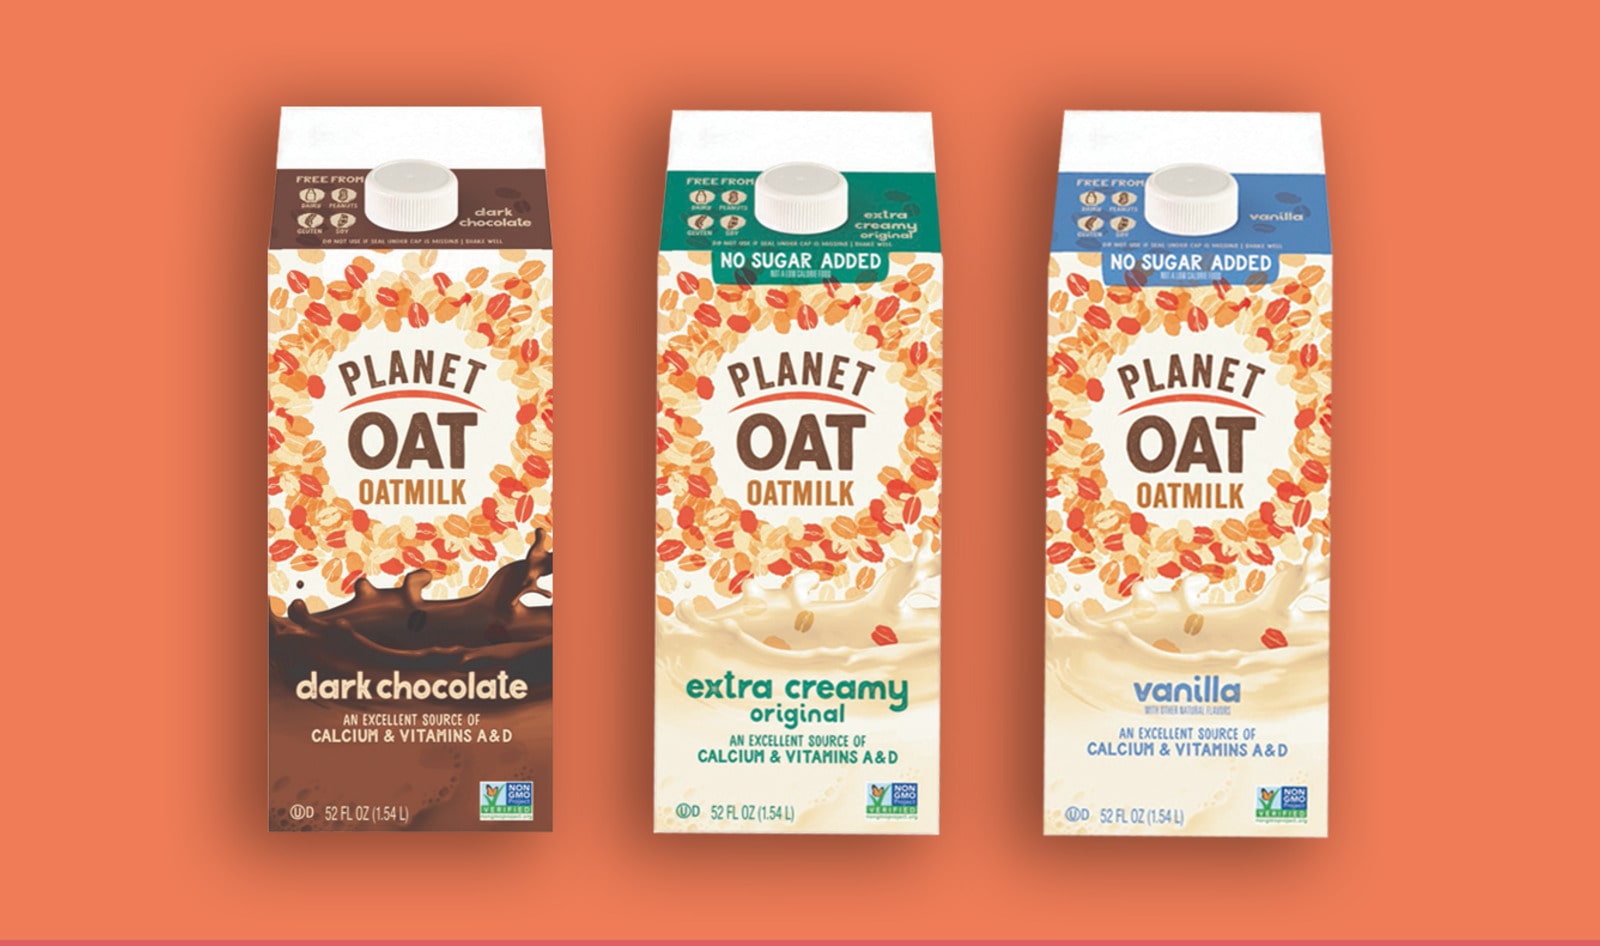 170-Year-Old Brand Launches Its First Vegan Oat Milk Line